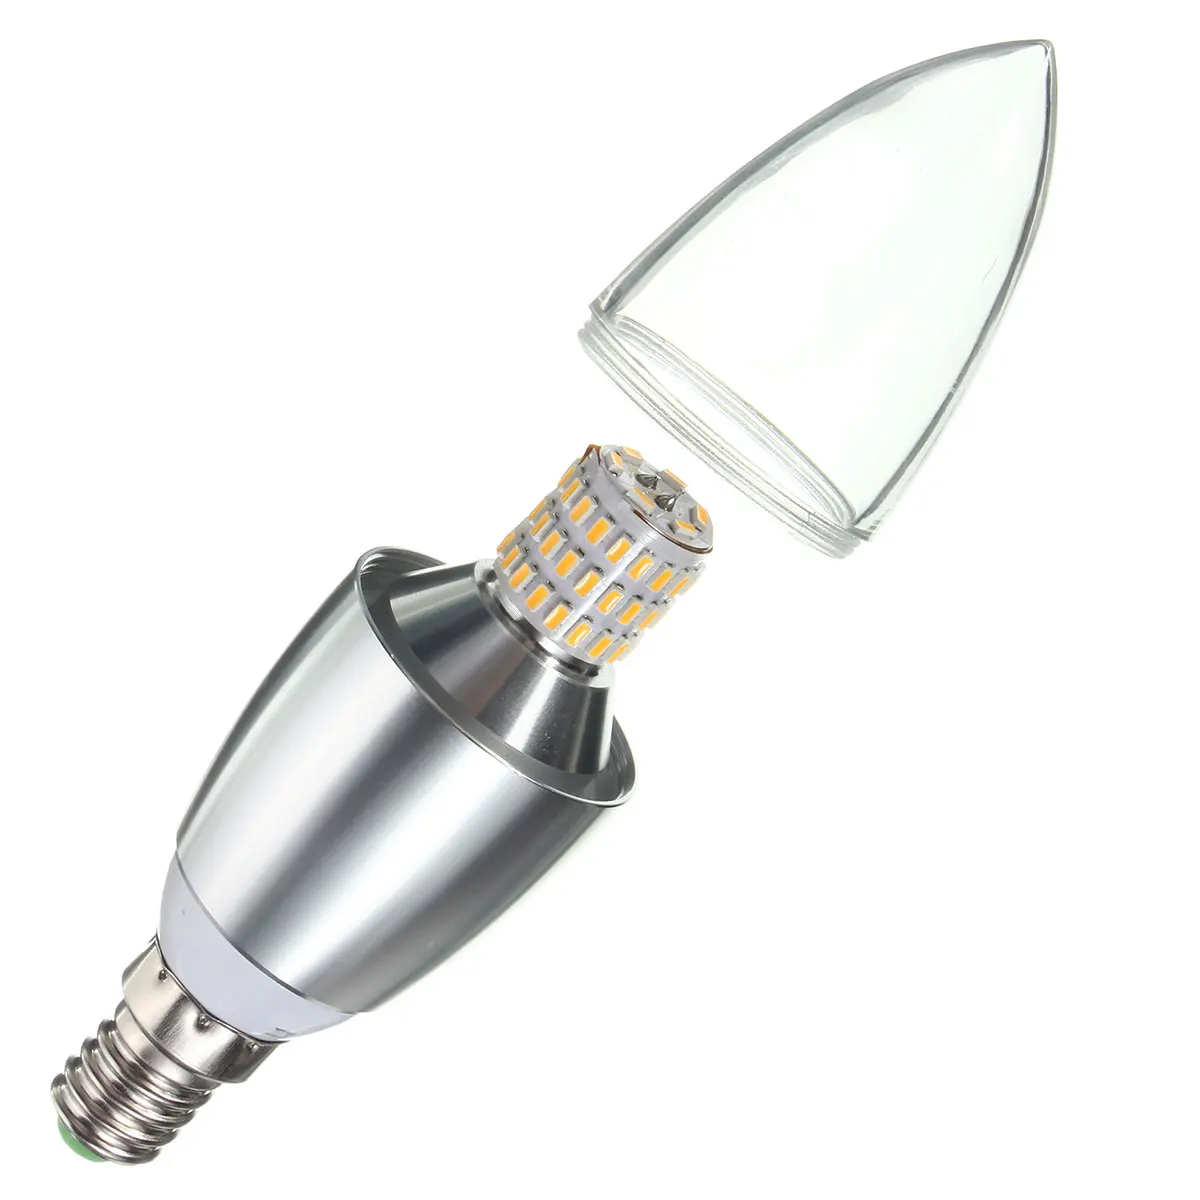 

AC85-265V E14 E12 7W 470LM 60 SMD 3014 LED White Warm White Glass Candle Bulb Light Non-Dimmable For Office Home KTV